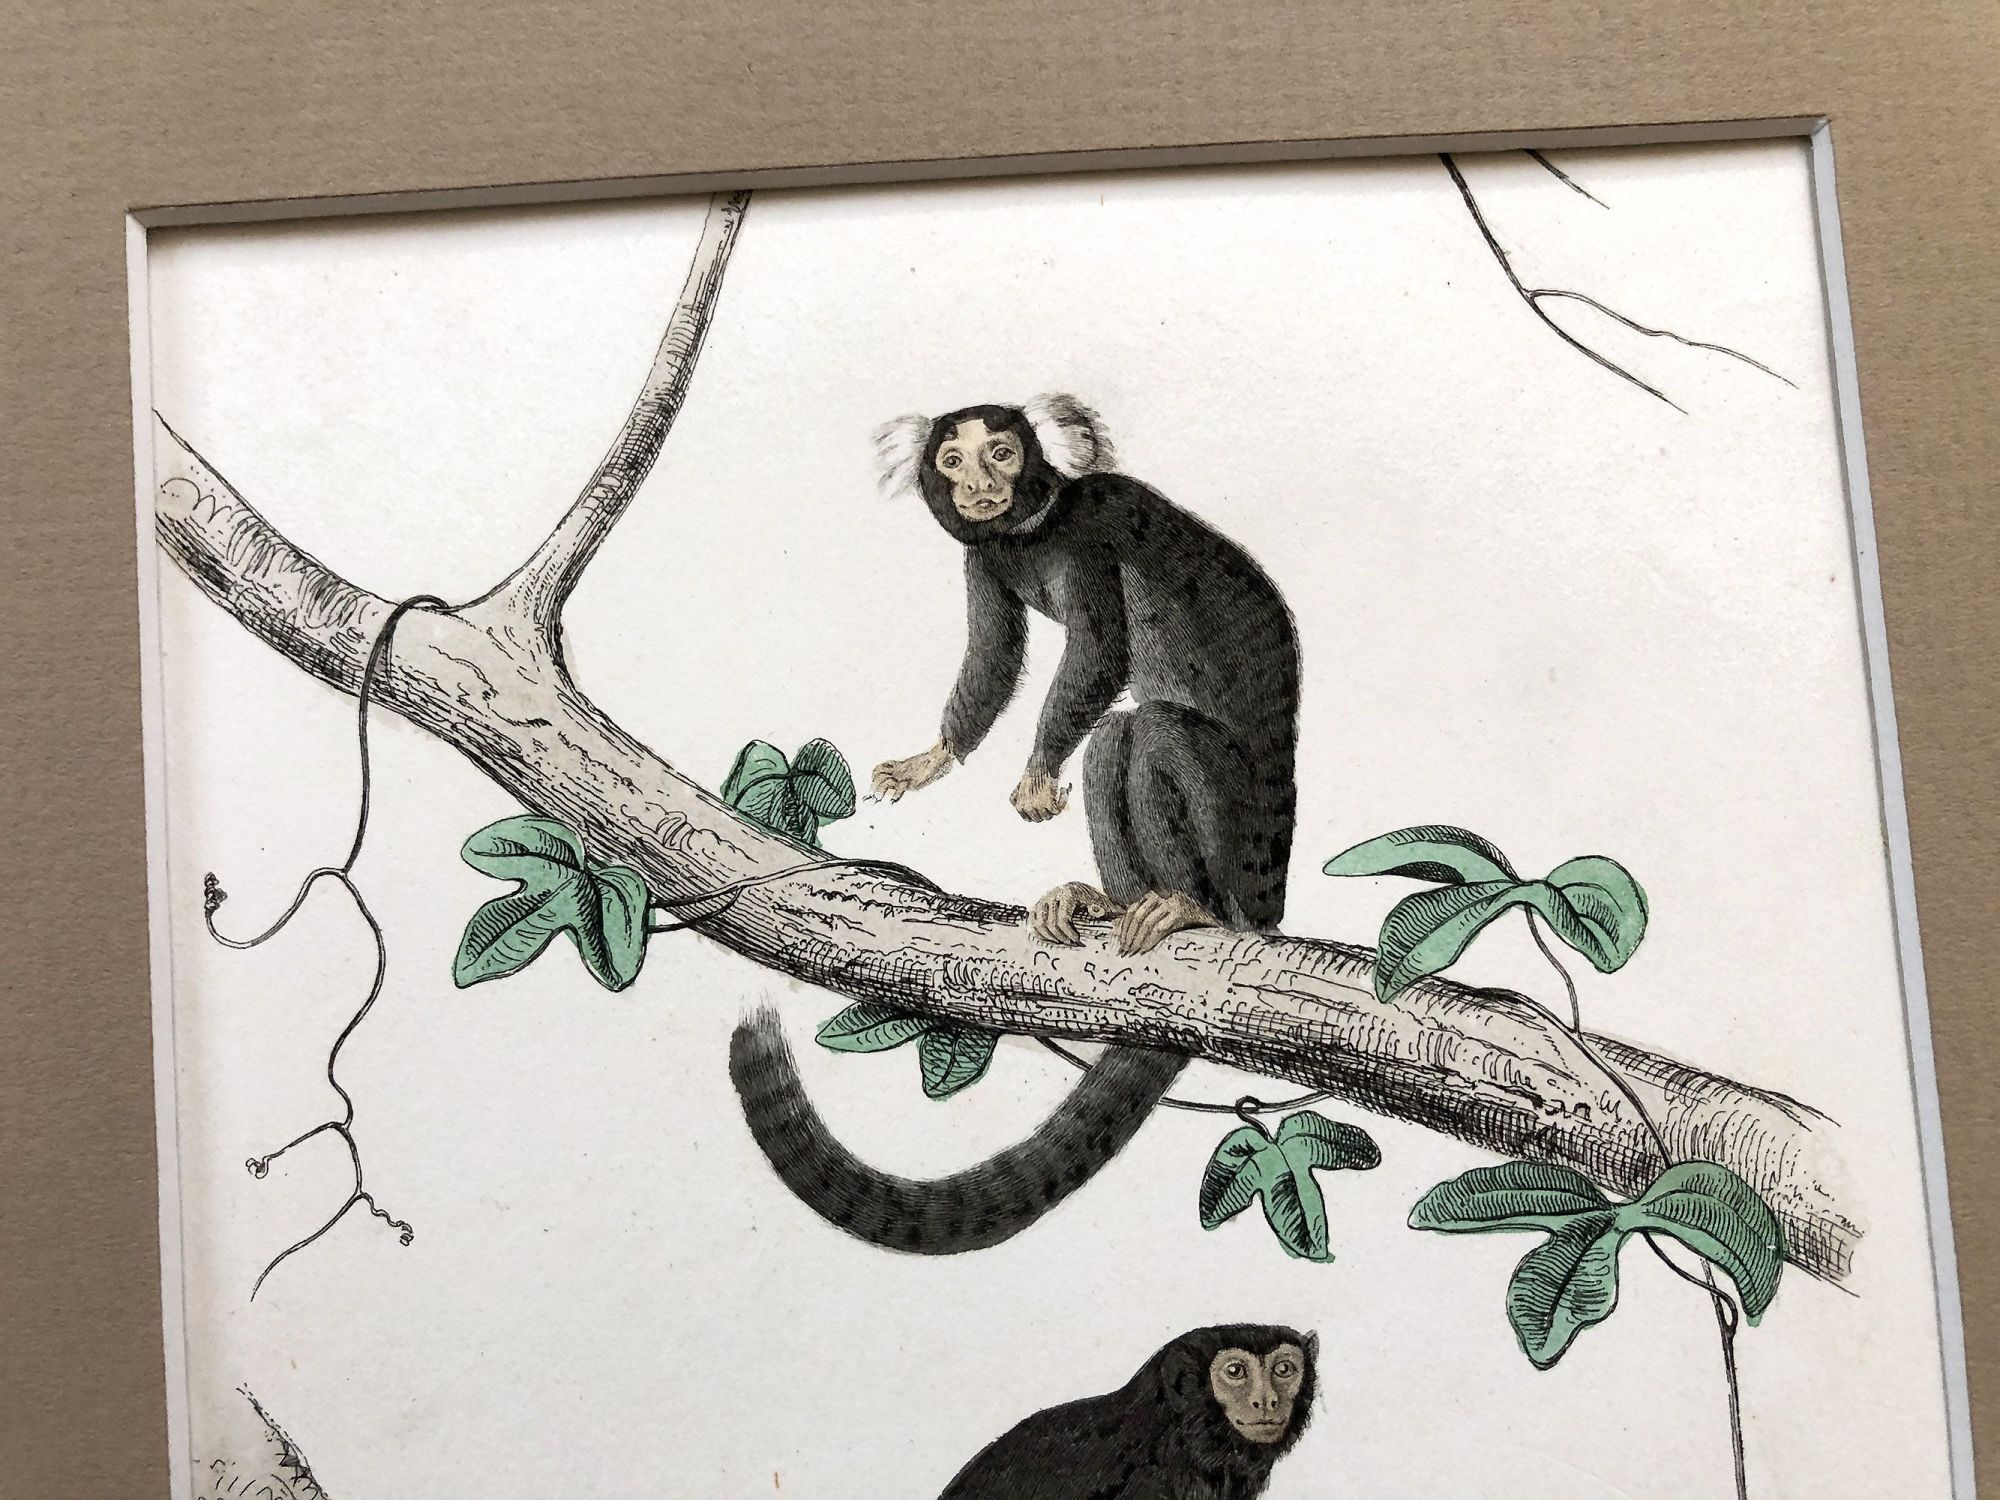 French engraving representing two types of monkey (the marmoset and the tamarind) from the middle of the 19th century